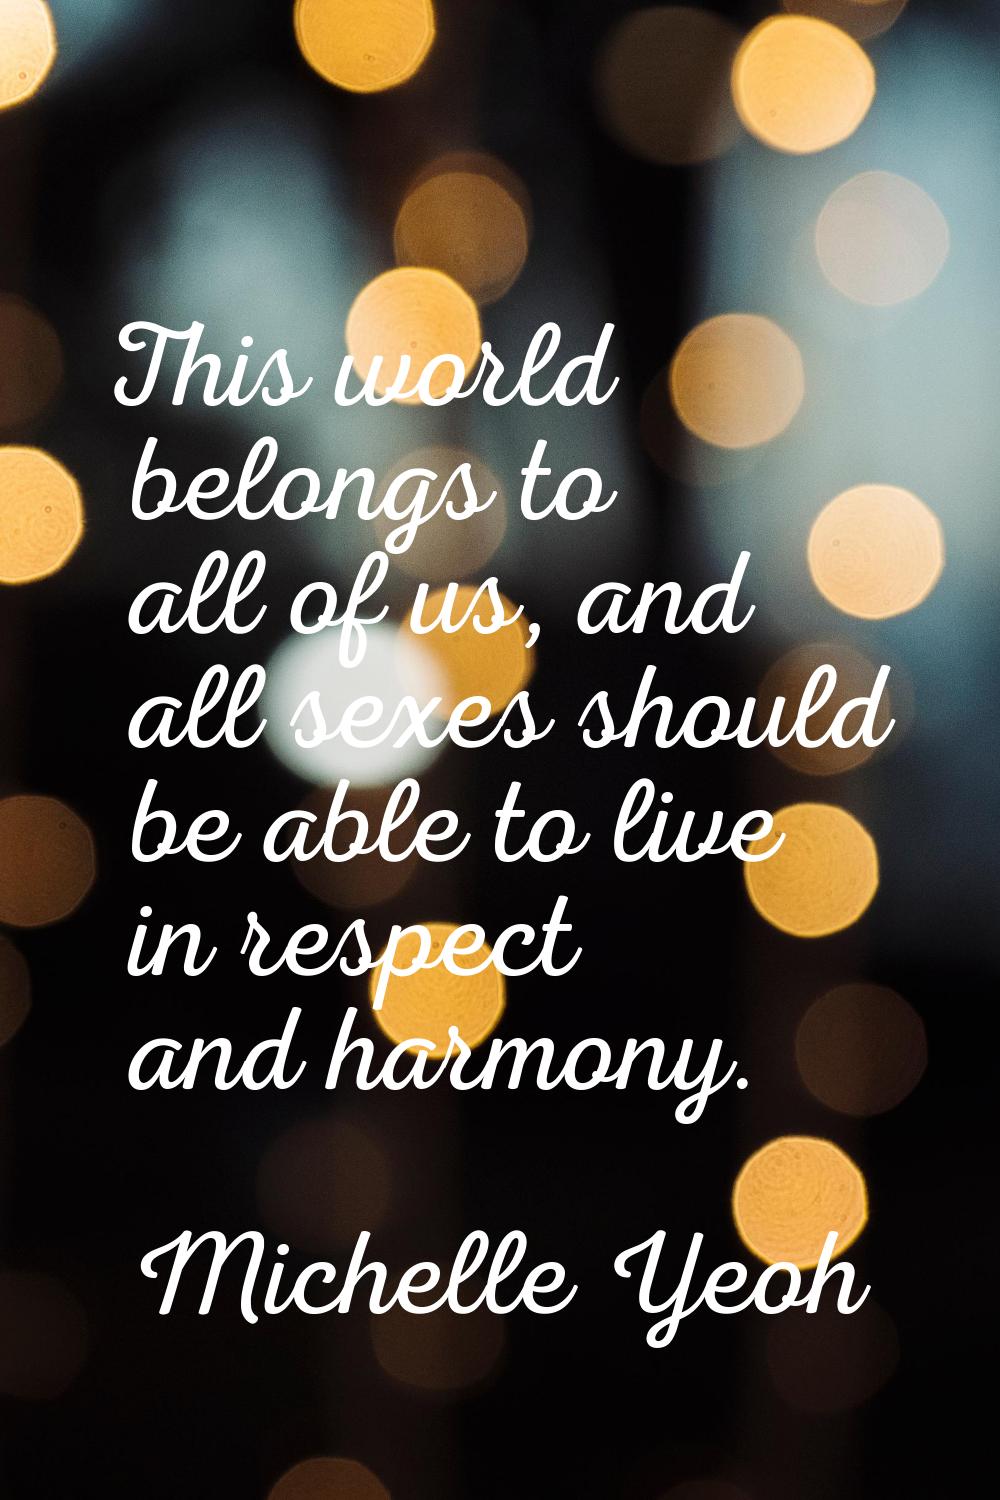 This world belongs to all of us, and all sexes should be able to live in respect and harmony.